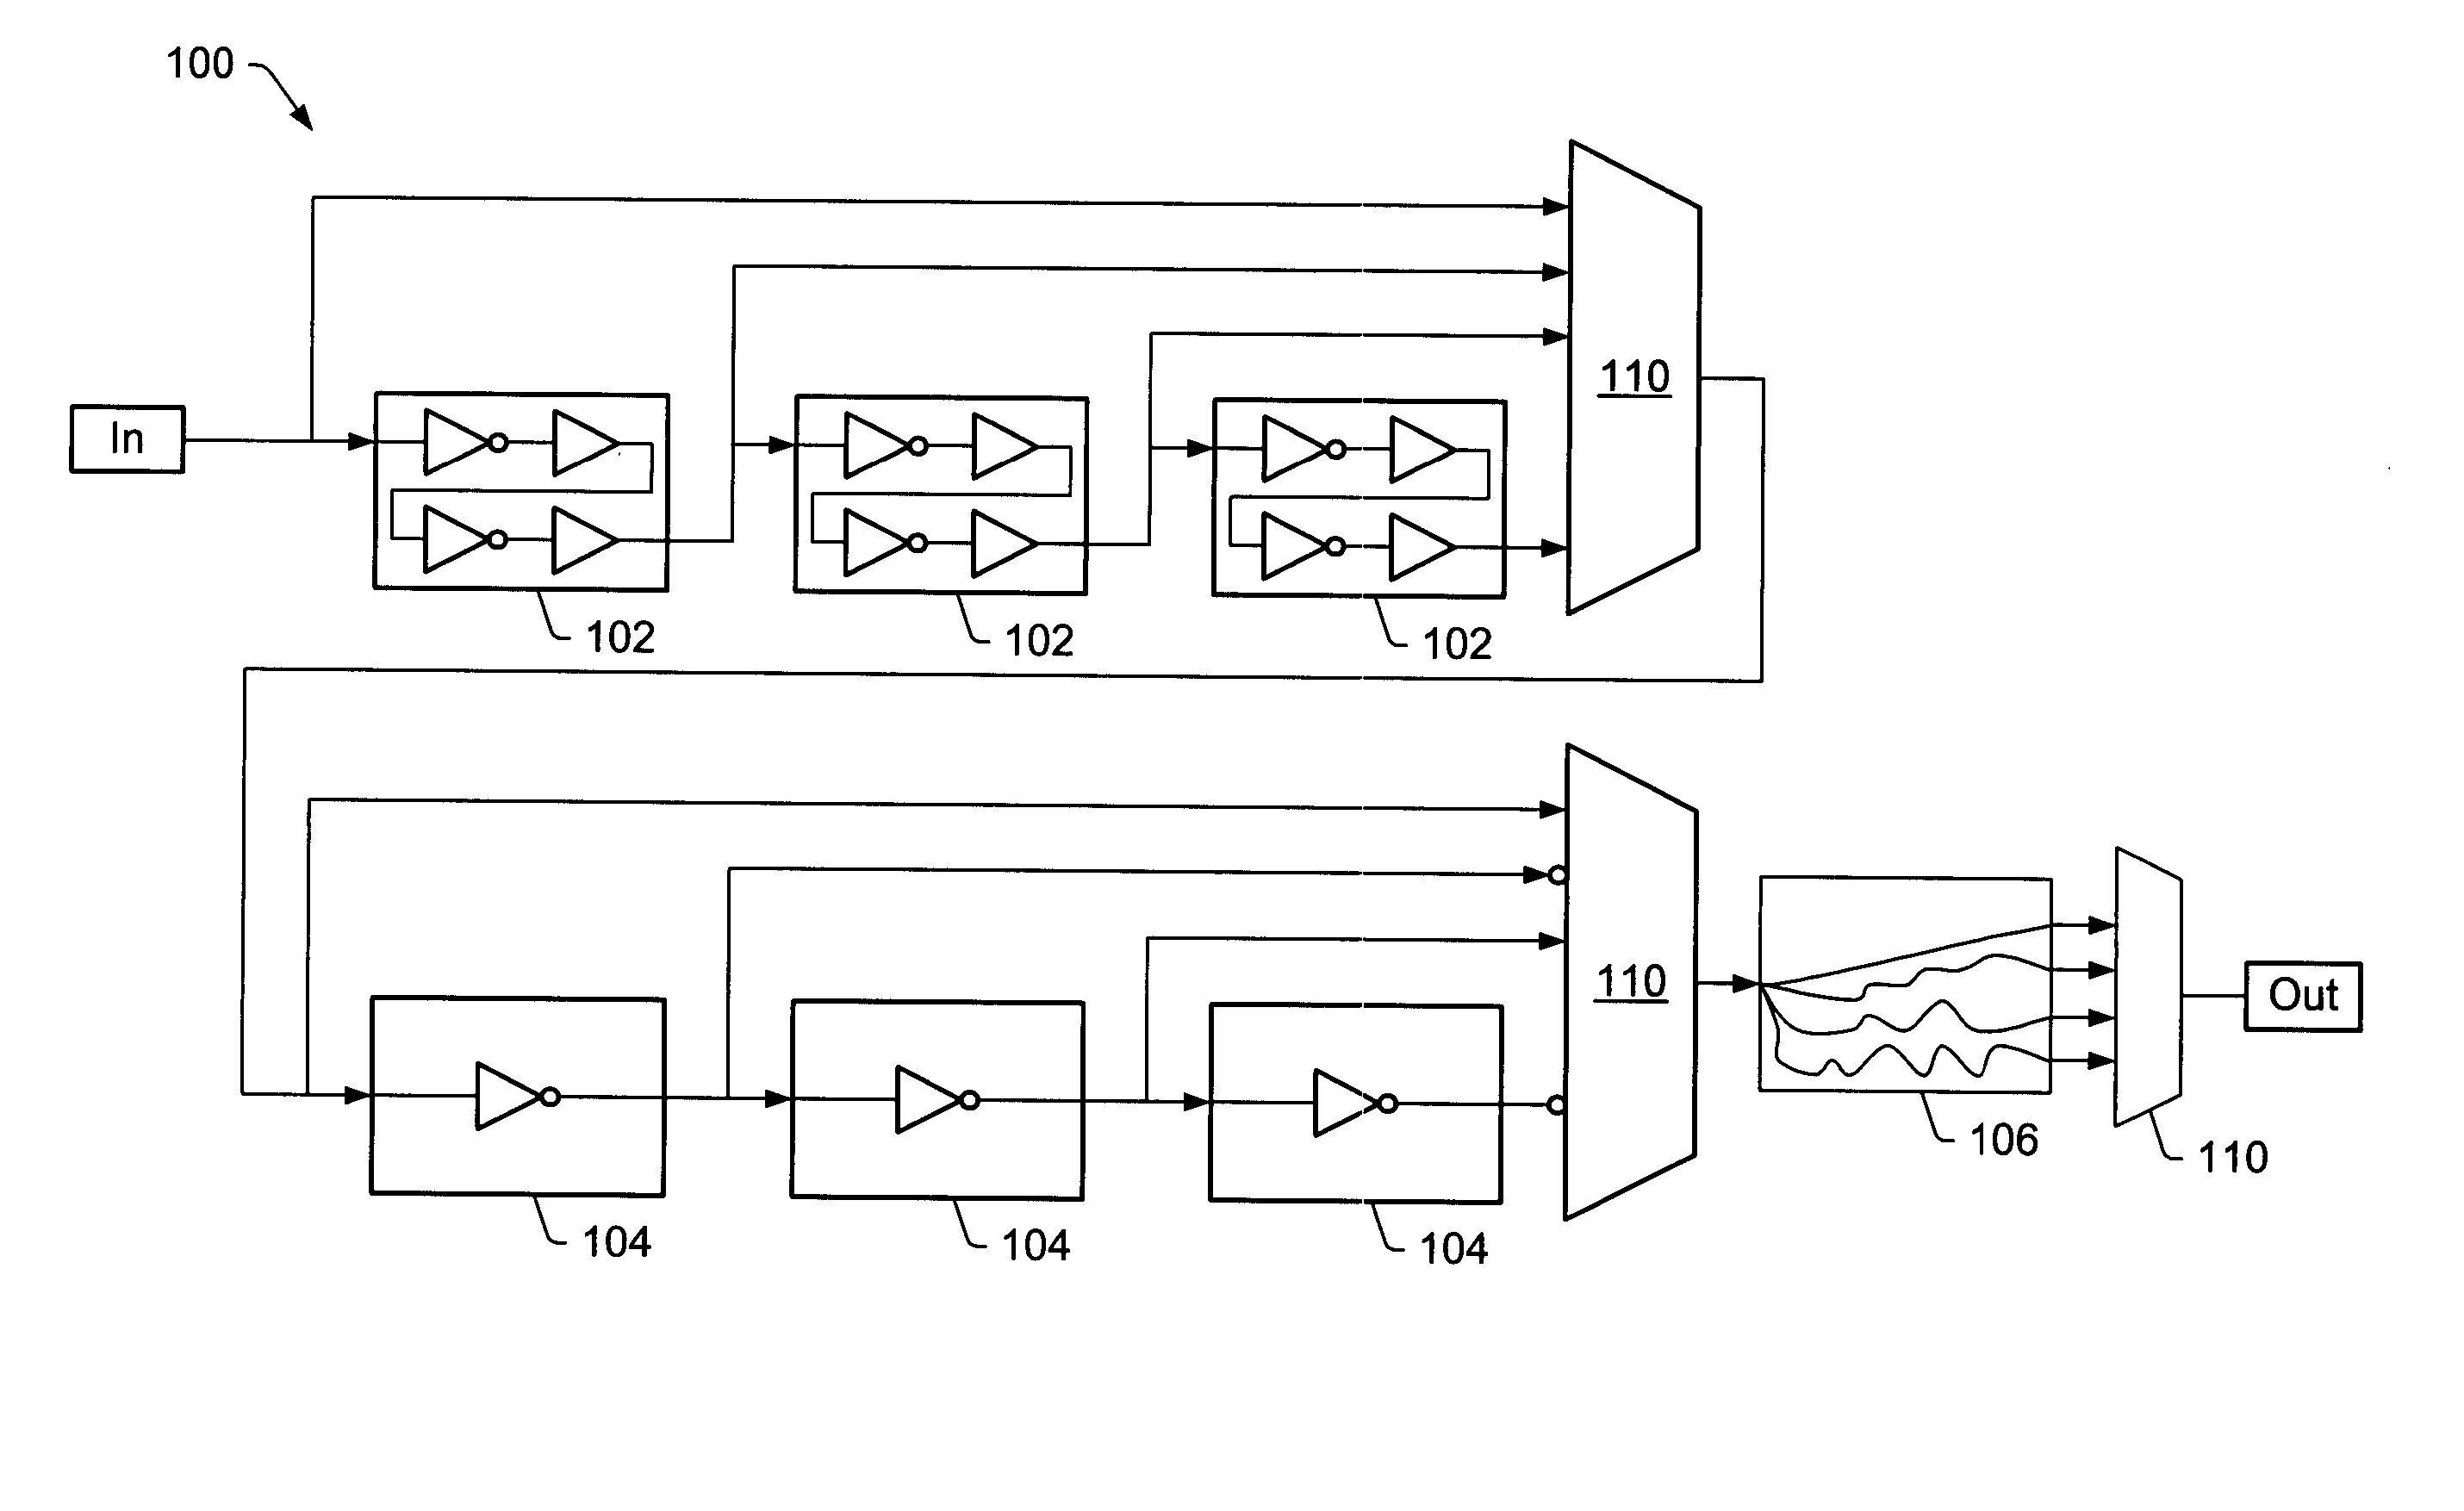 Digital delay elements constructed in a programmable logic device